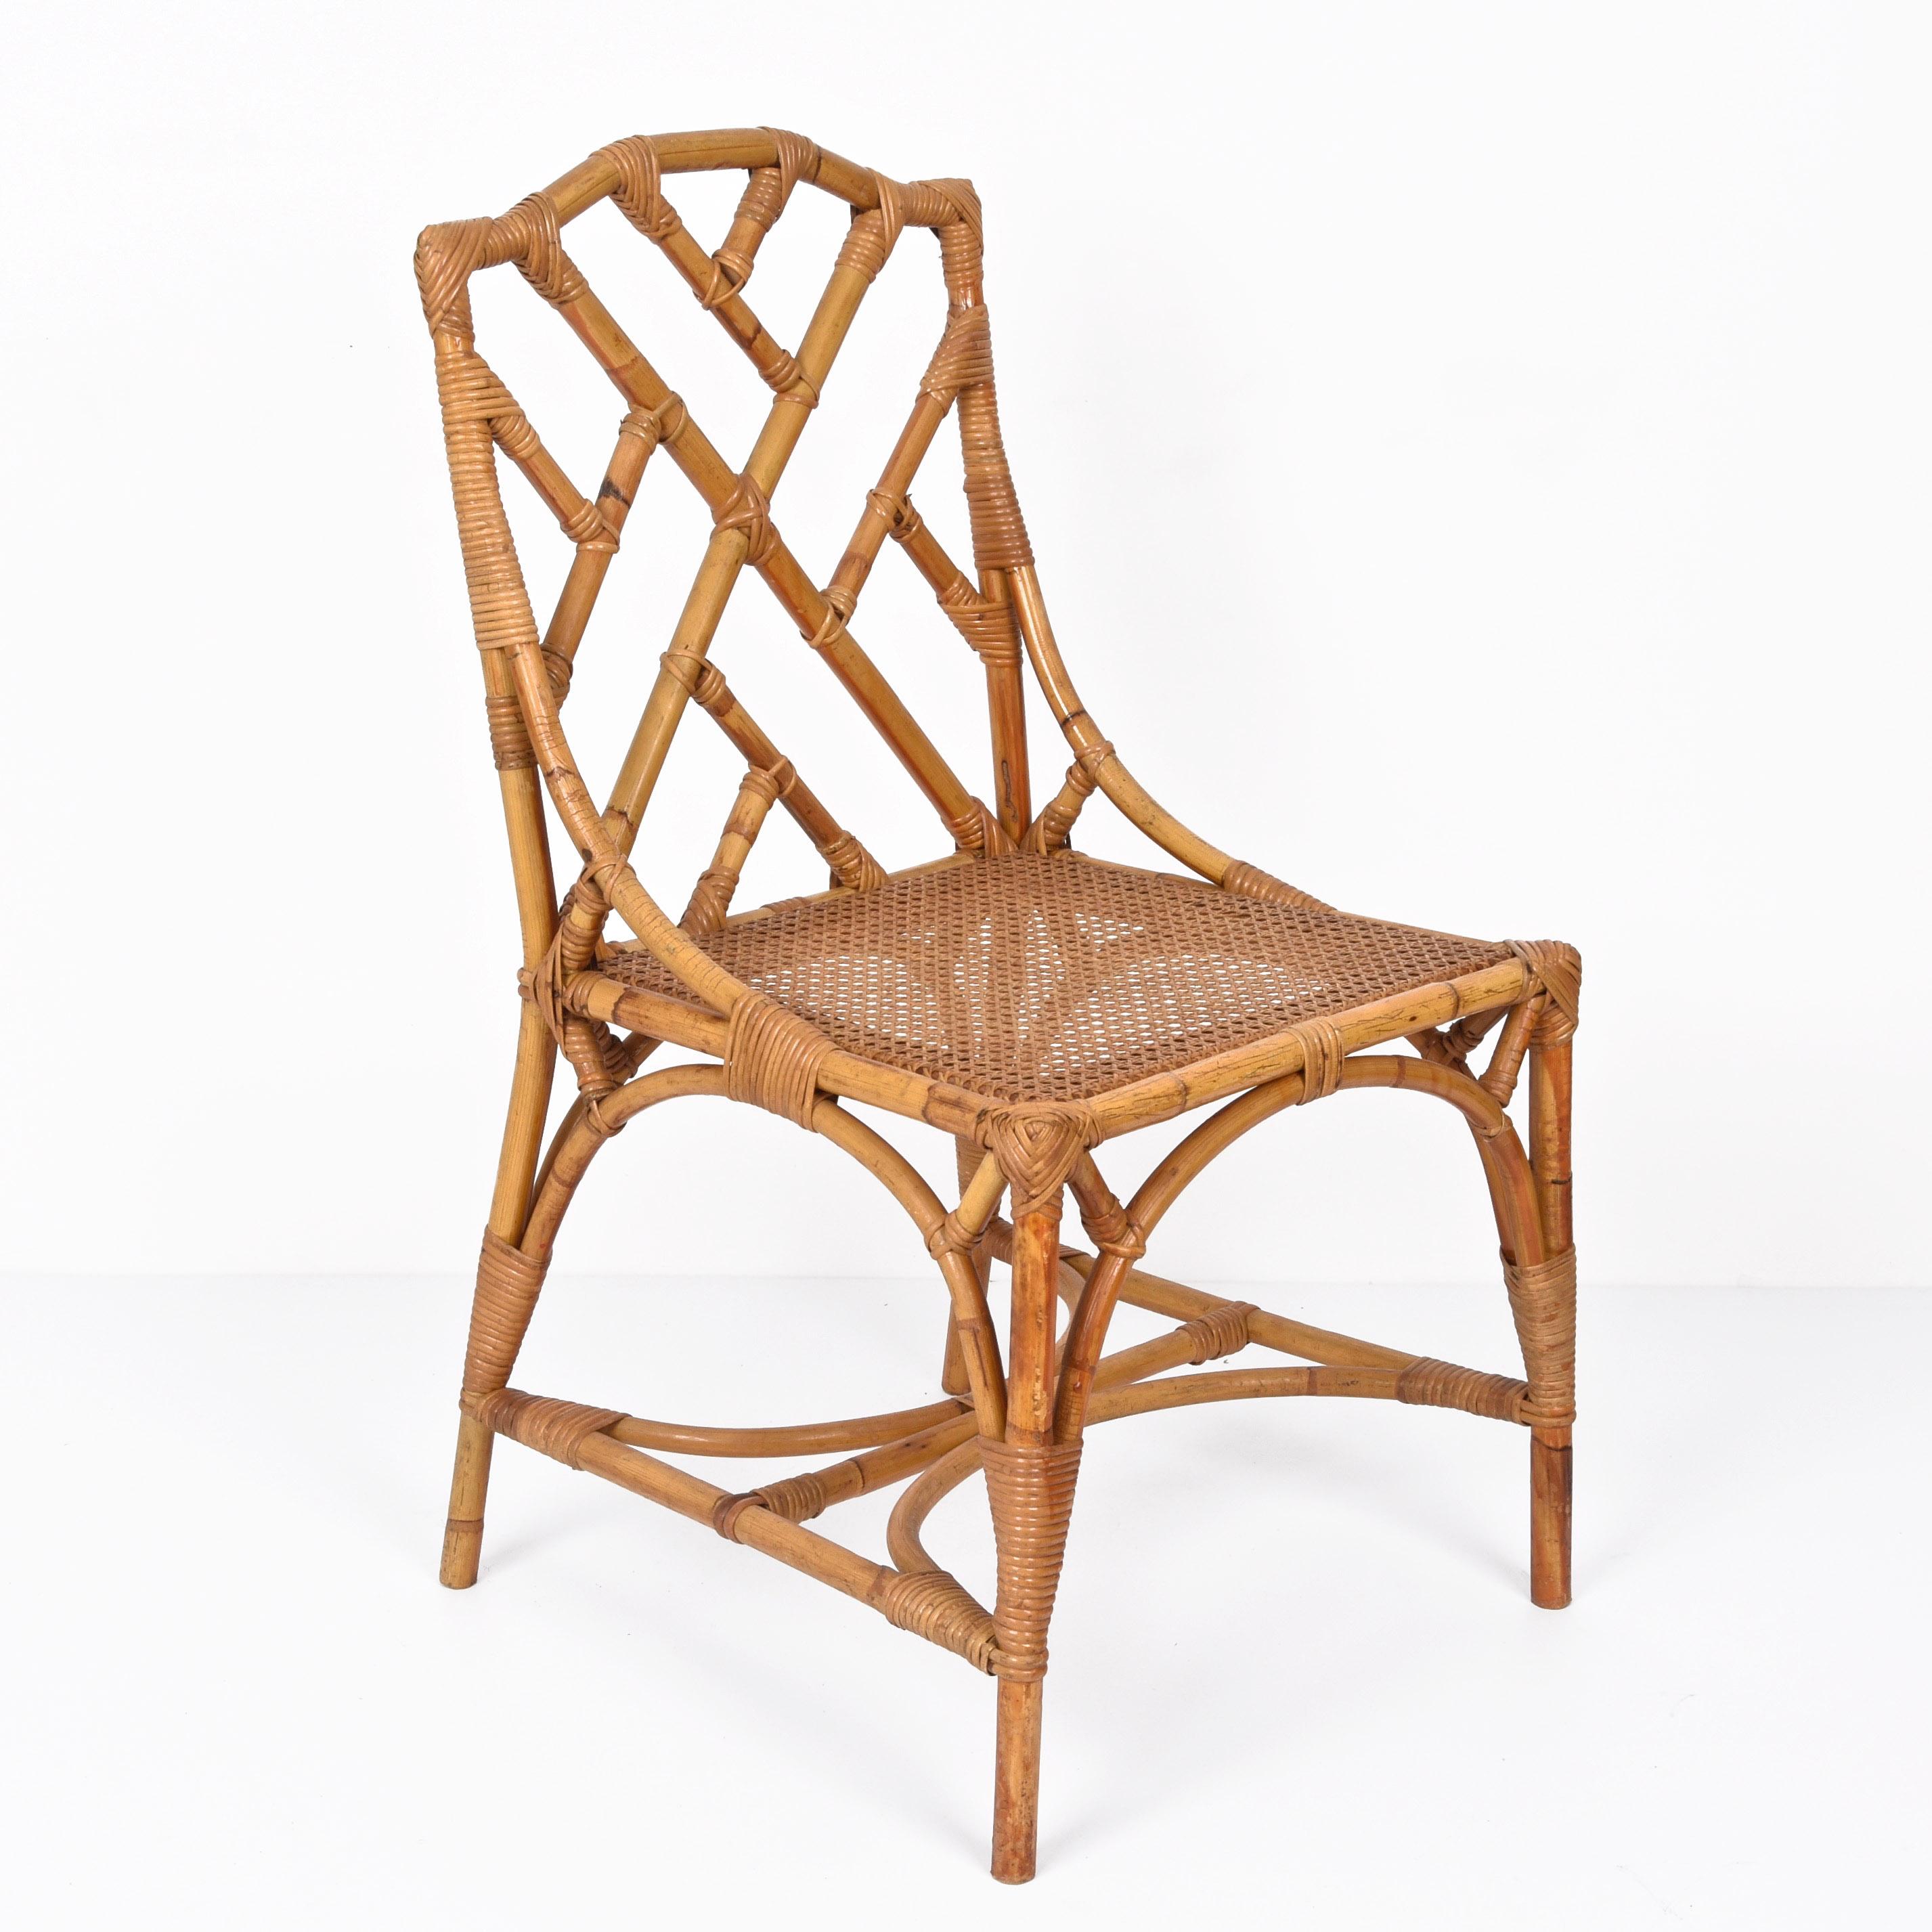 Amazing robust midcentury modern bamboo and Vienna straw dining chair. This fantastic item was designed in Italy during the 1960s by Vivai del Sud.

This amazing item is a wonderful example of Italian manufacture from the 1960s with a solid bamboo